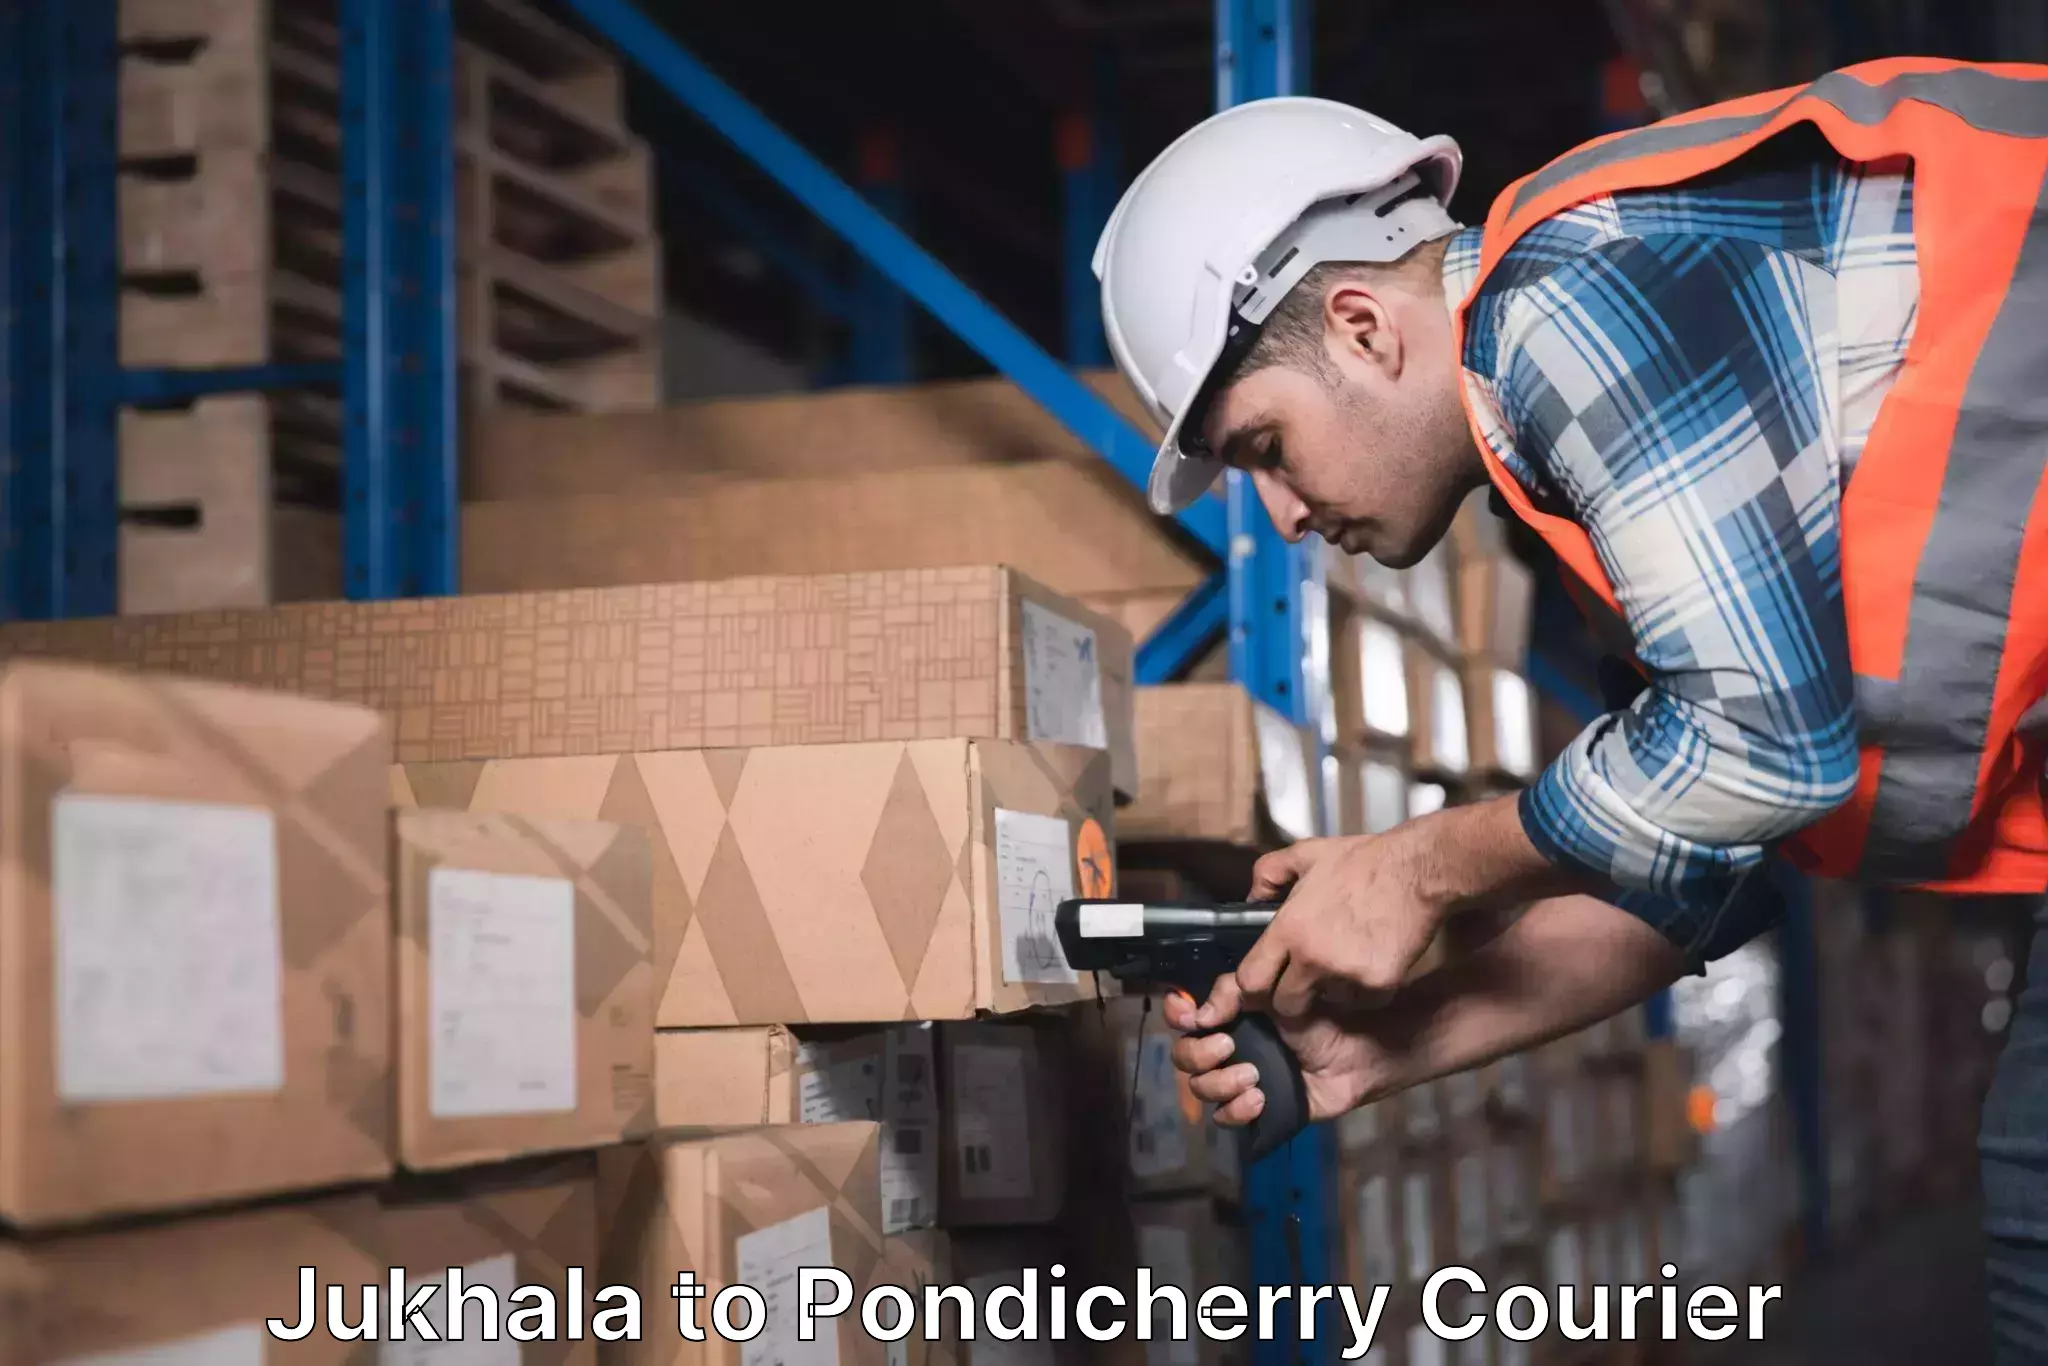 Customer-centric shipping in Jukhala to Pondicherry